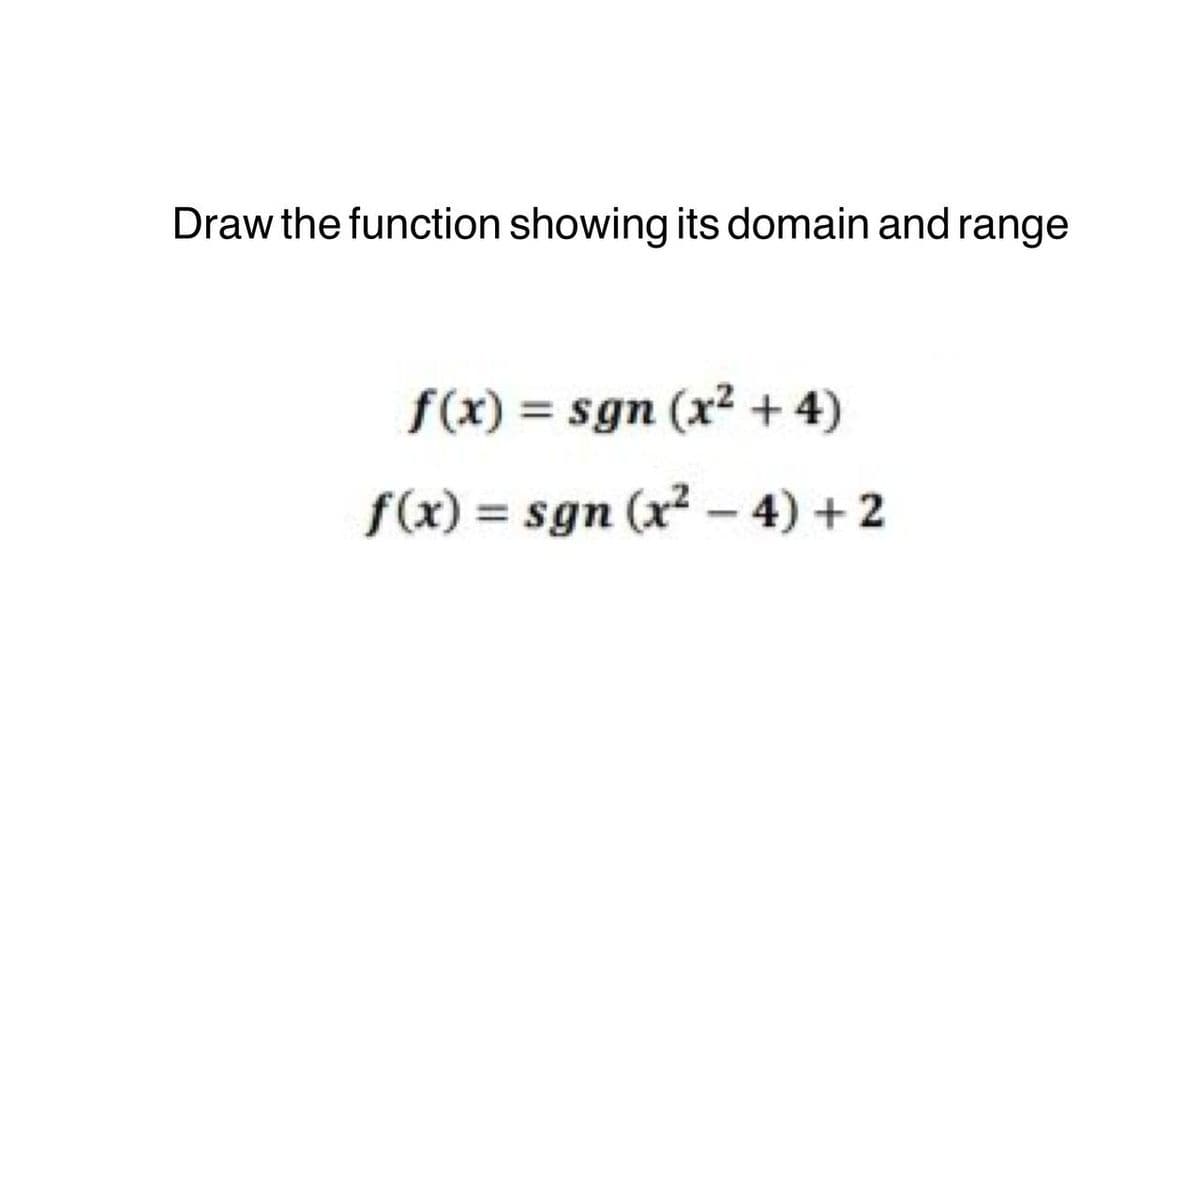 Draw the function showing its domain and range
f(x) = sgn (x² + 4)
f(x) = sgn (x² - 4) + 2